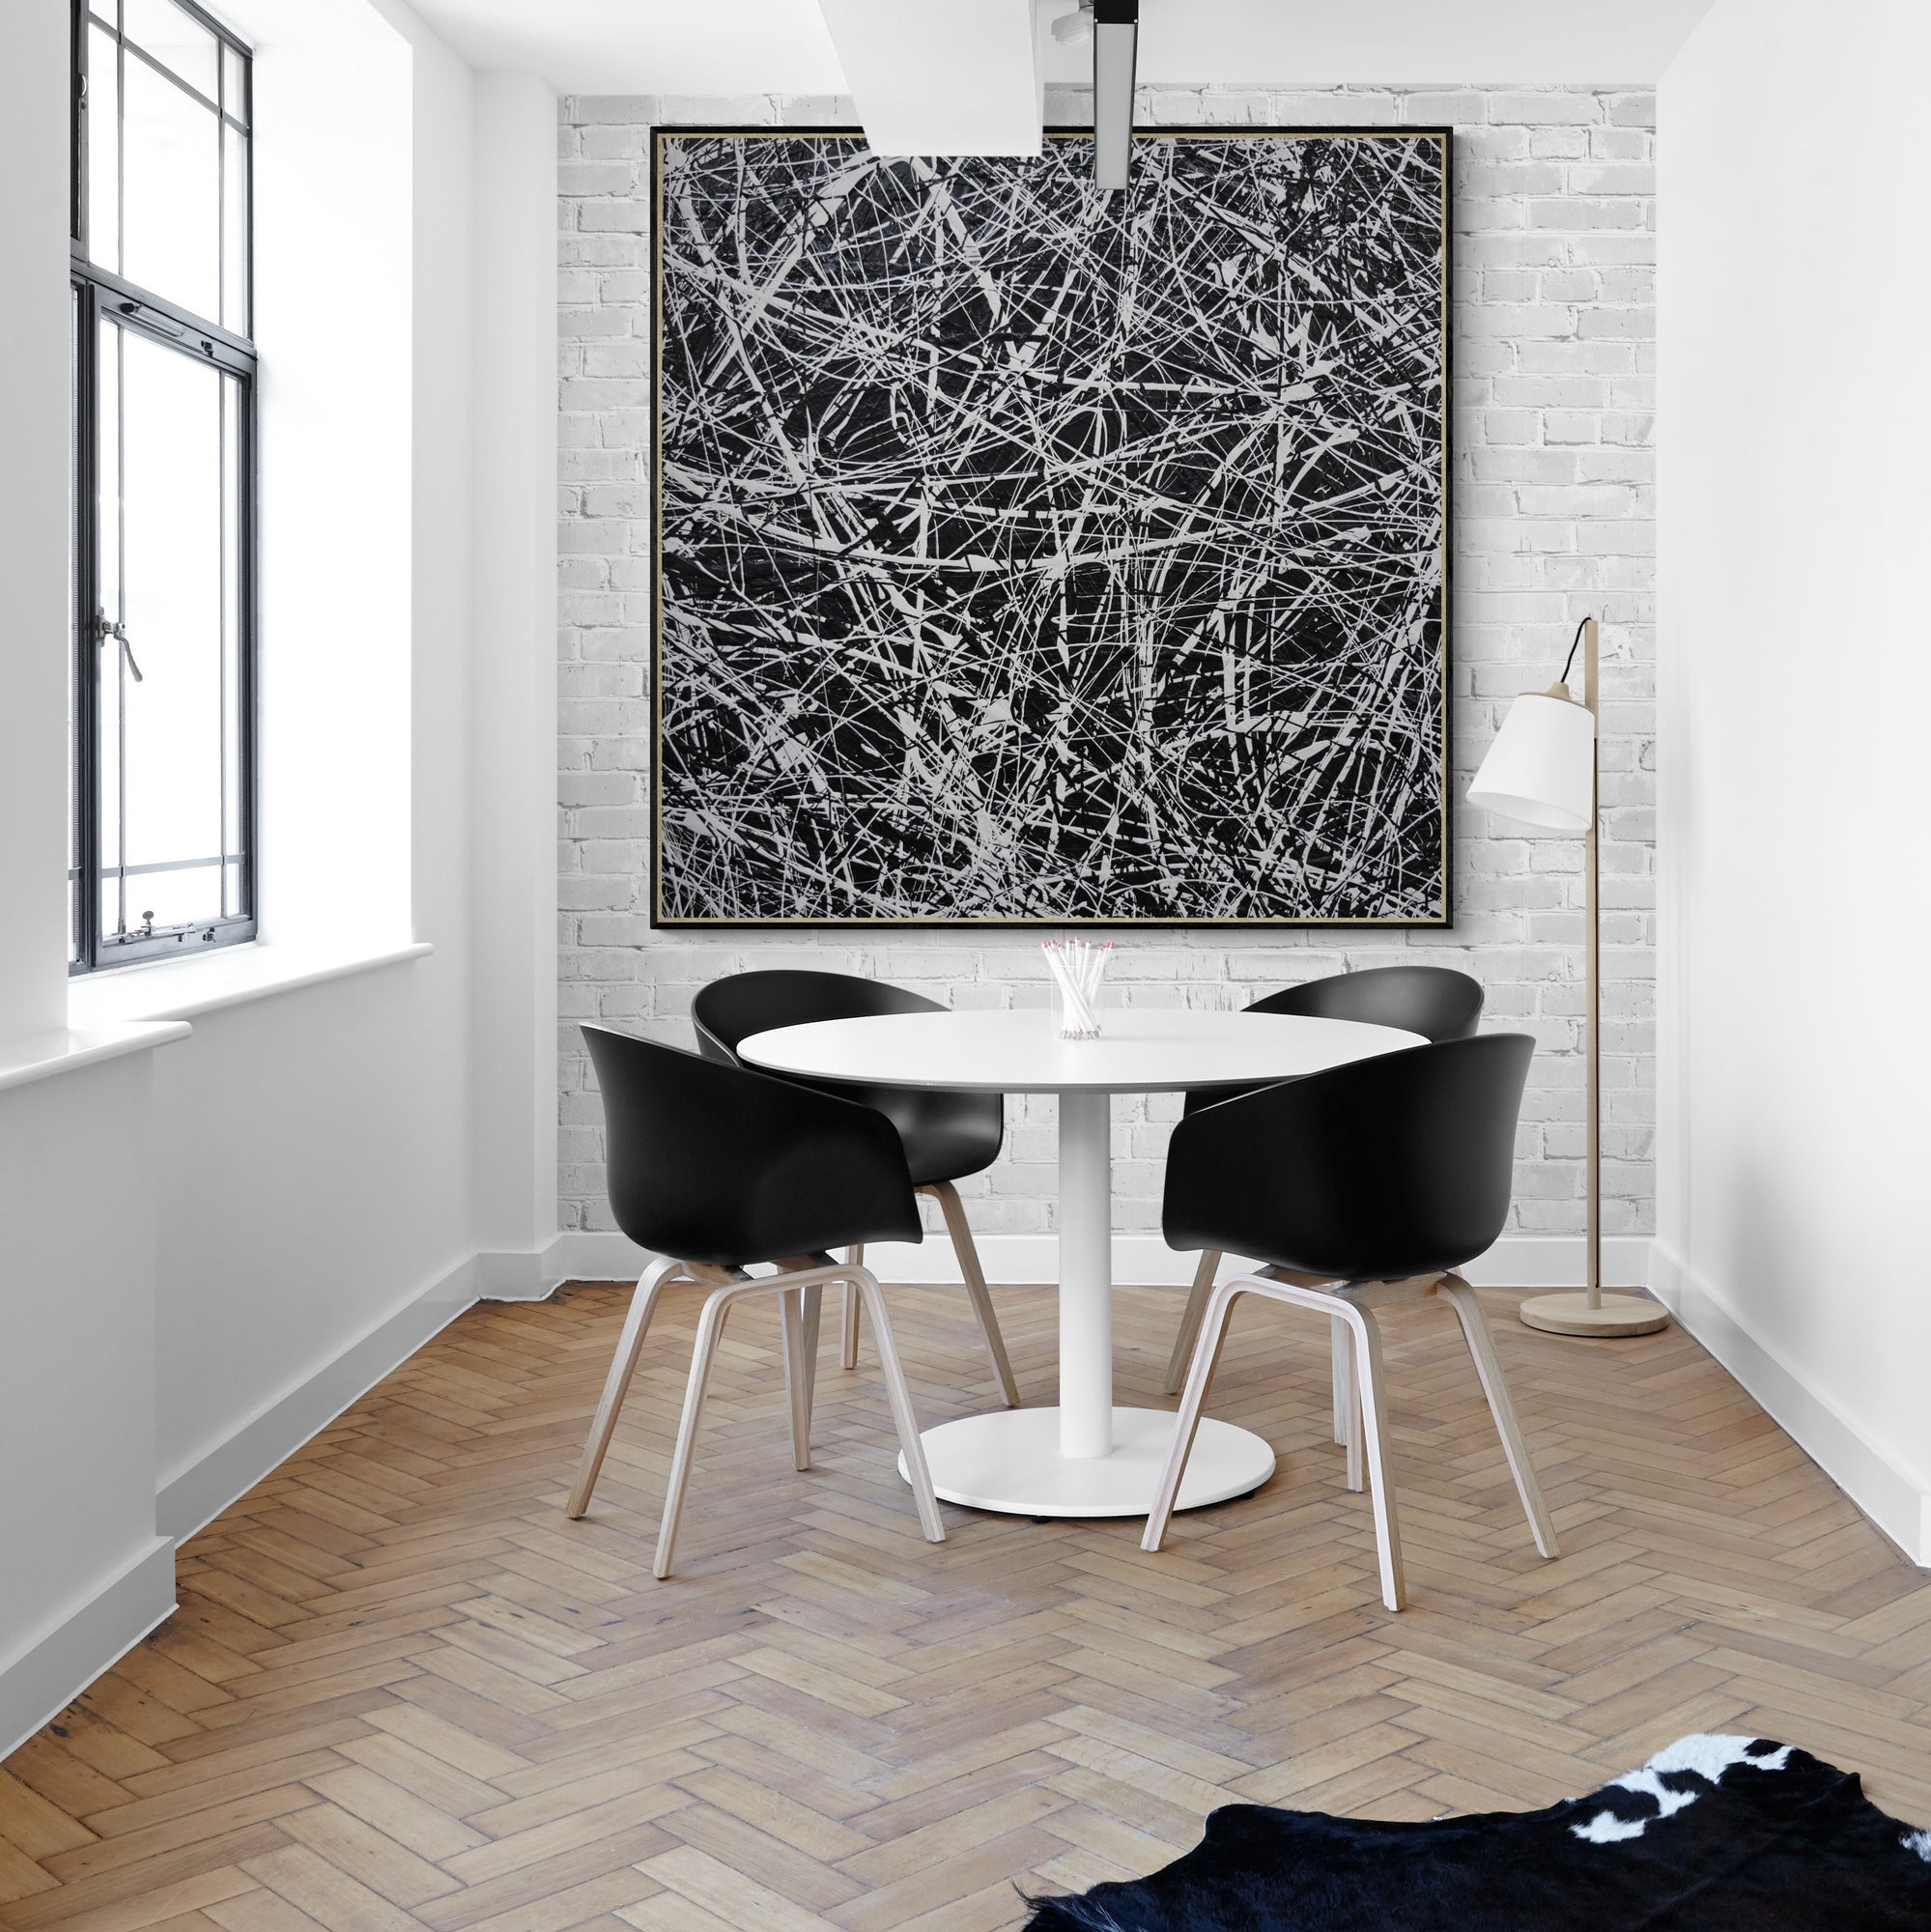 Frozen Squared 150cm x 150cm Black White Textured Abstract Painting